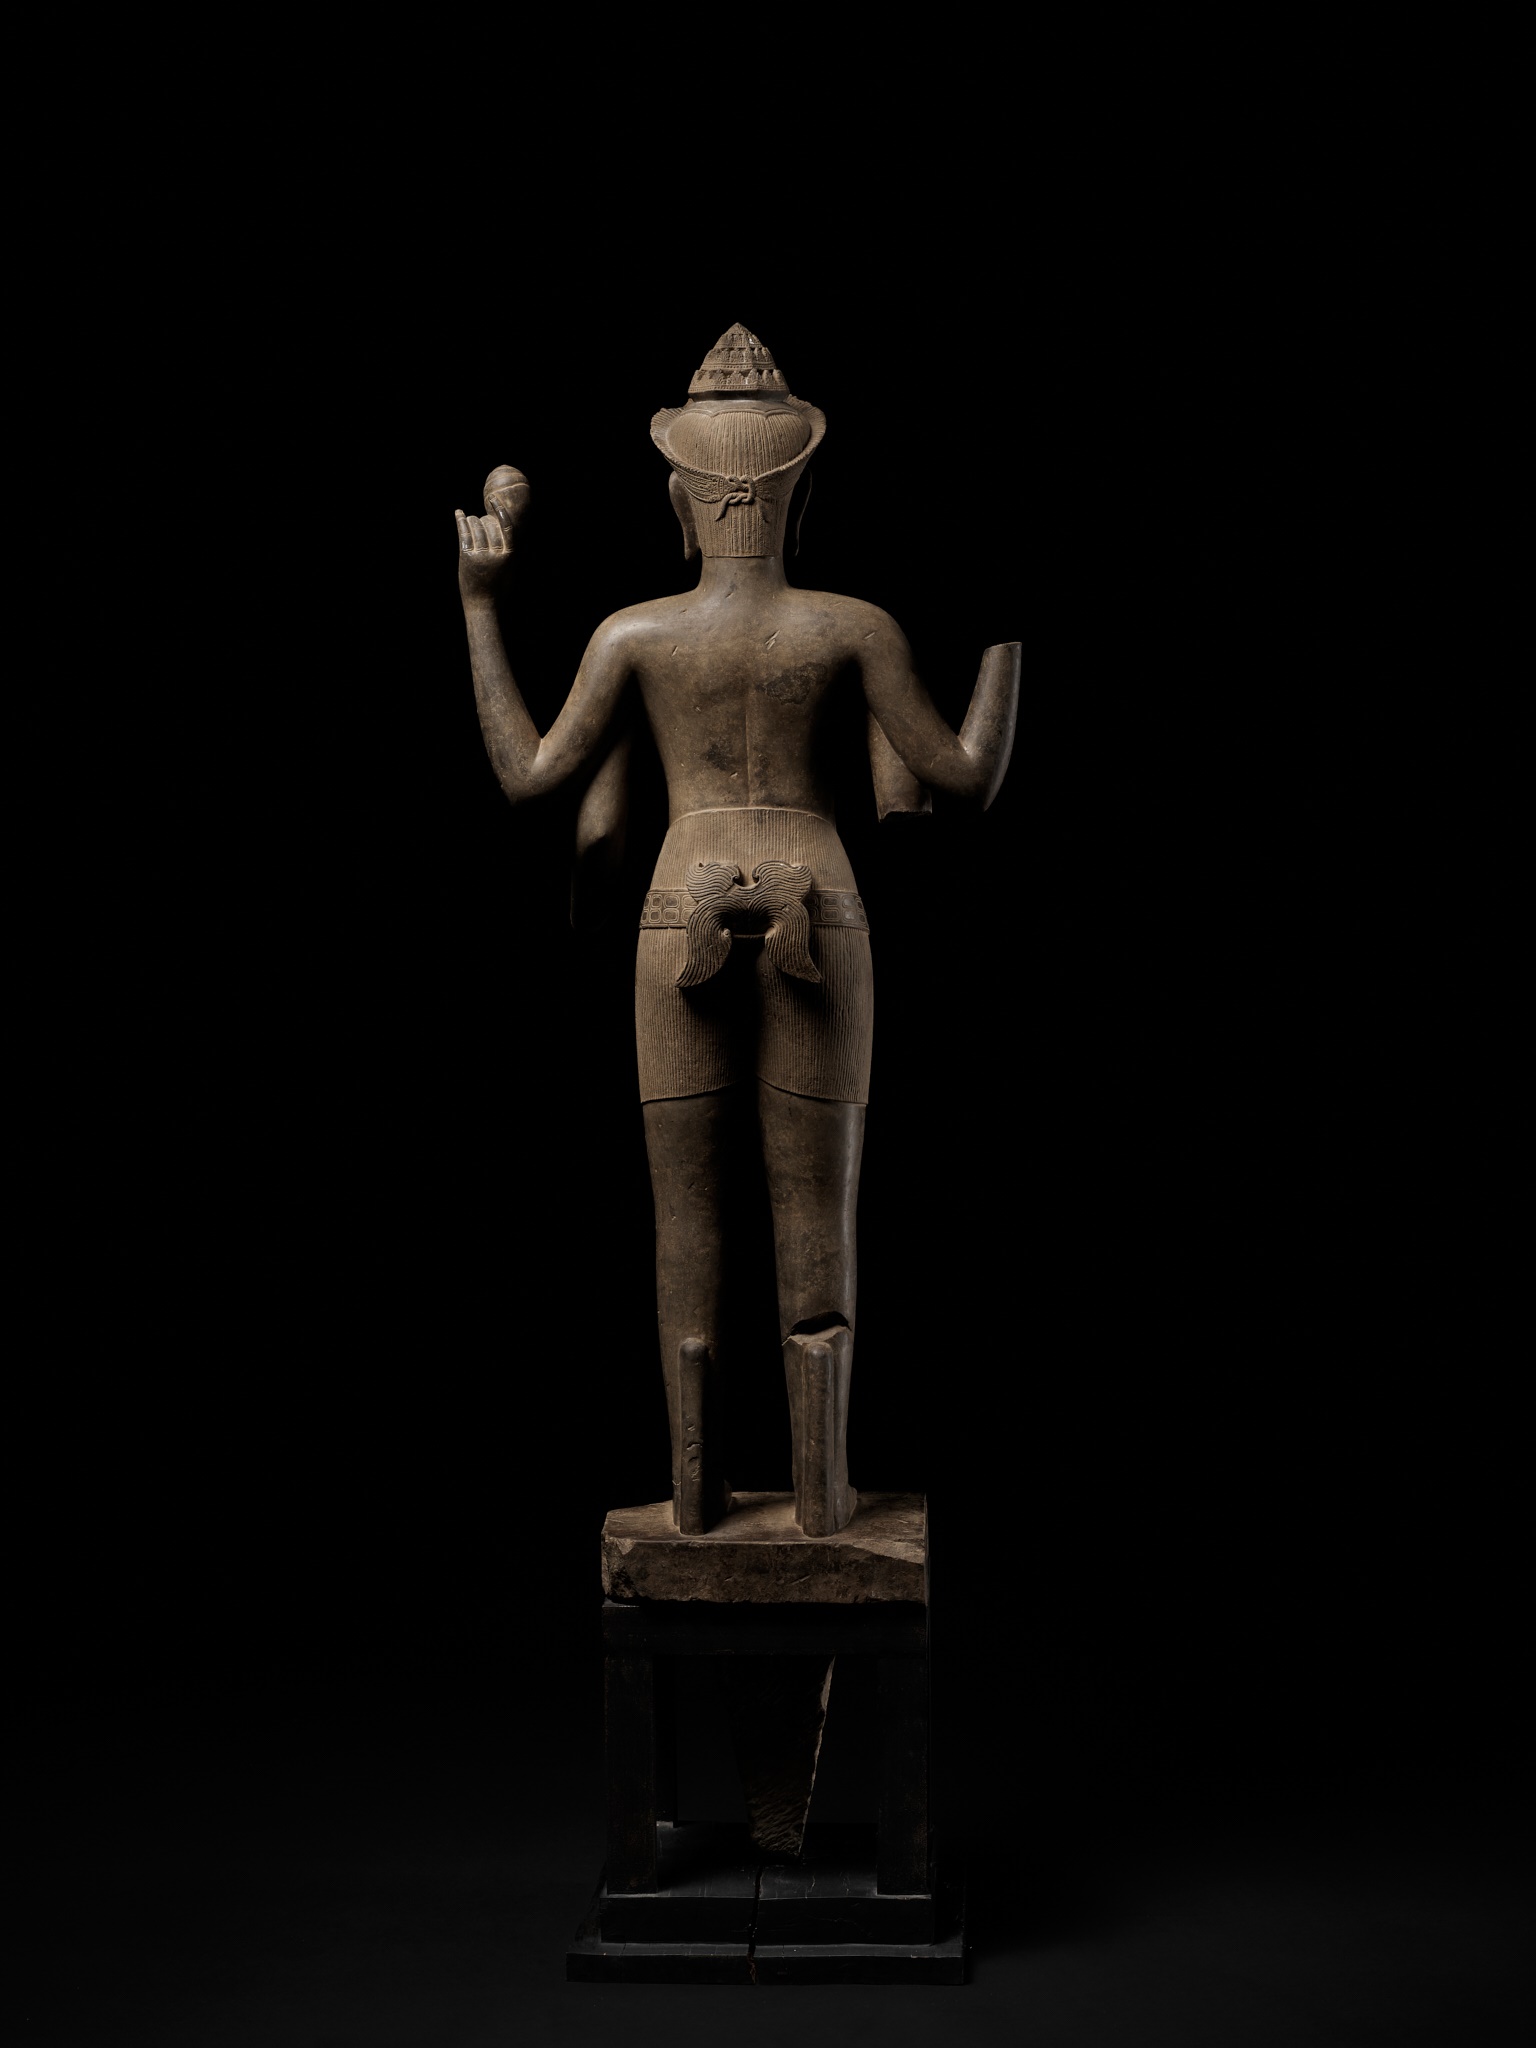 AN EXTREMELY RARE AND MONUMENTAL SANDSTONE STATUE OF VISHNU, ANGKOR PERIOD - Image 13 of 17